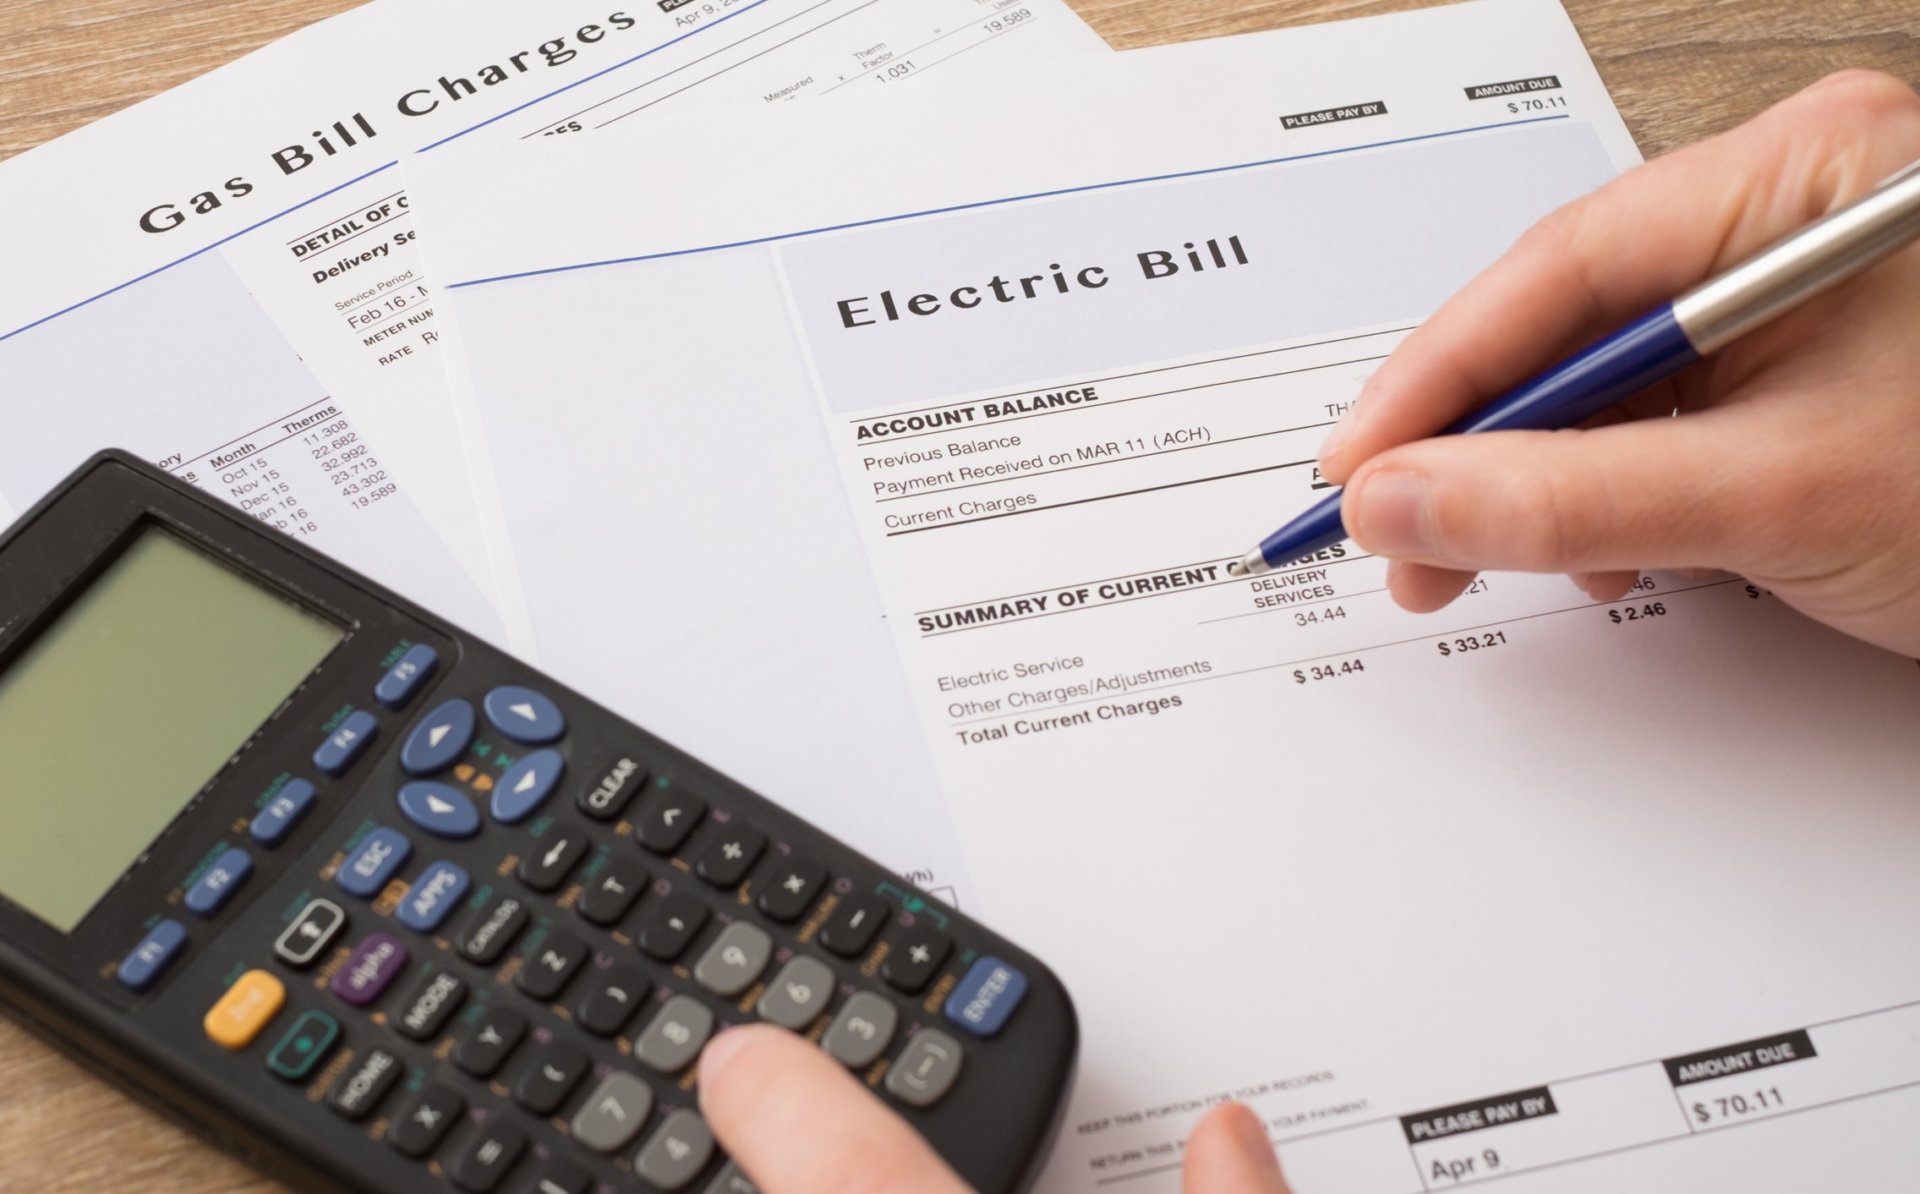 The image shows a calculator on several energy bills with prices together with a hand holding a blue pen.